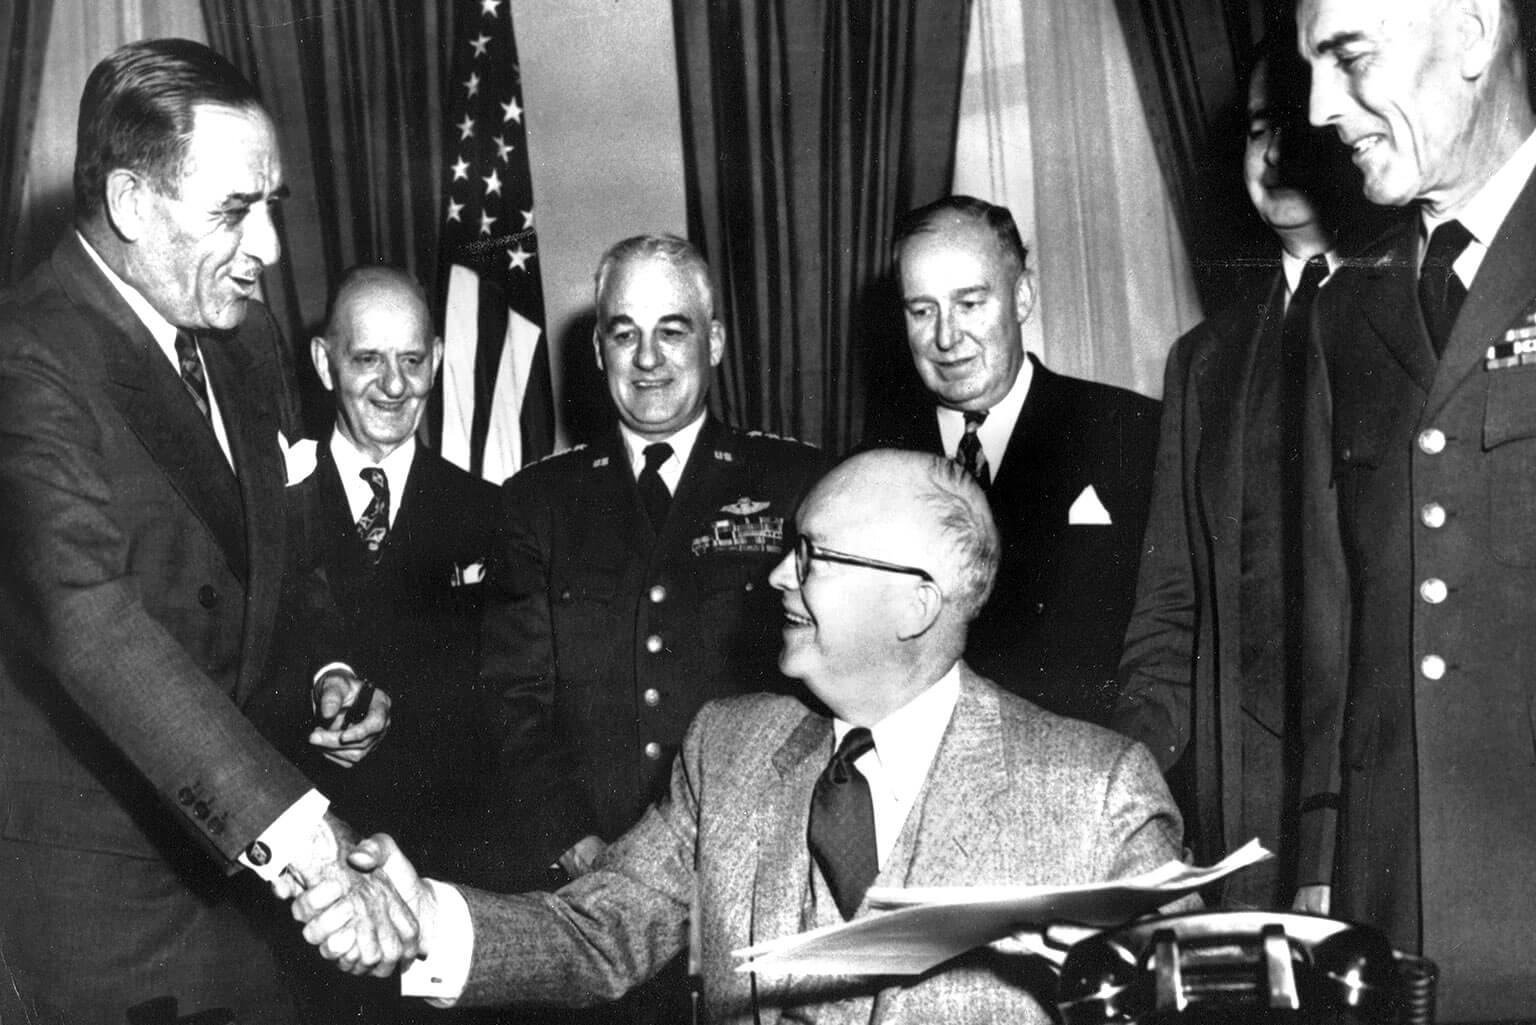 President Dwight D. Eisenhower shakes hands with Secretary of the Air Force Harold Talbott after signing legislation authorizing the establishment of the U.S. Air Force Academy.